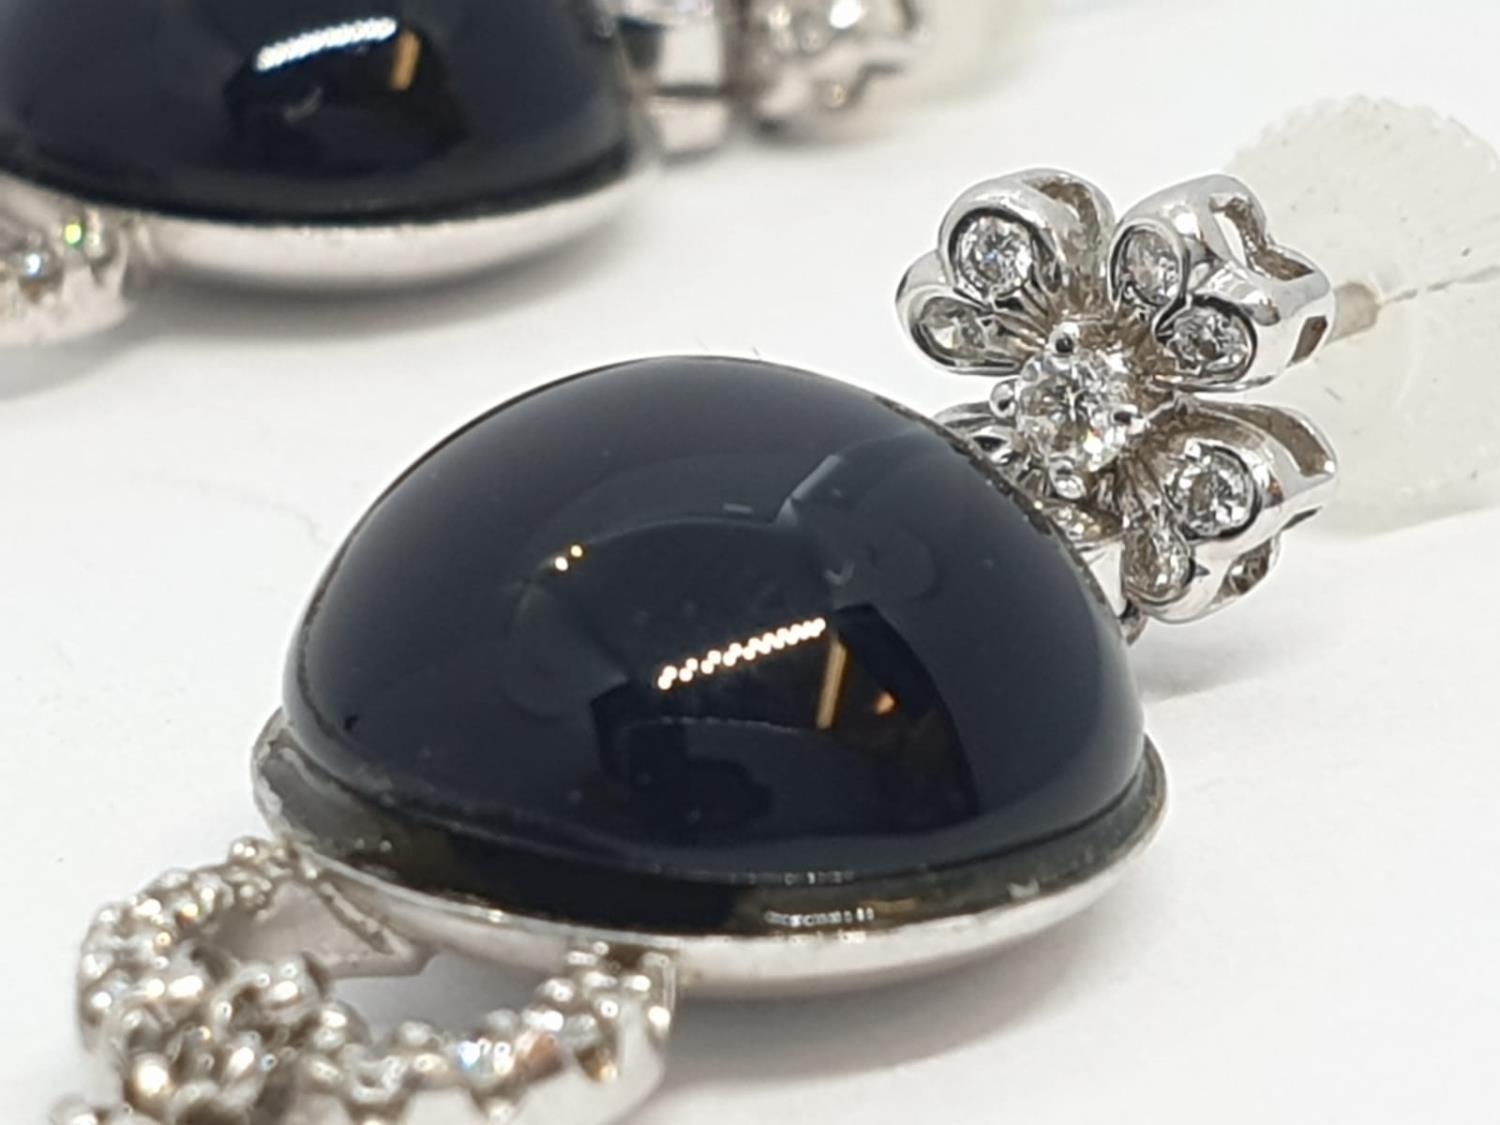 Pair of Onyx and diamond drop earrings set in 18ct gold, weight 10.13g and 7cm drop approx - Image 4 of 5